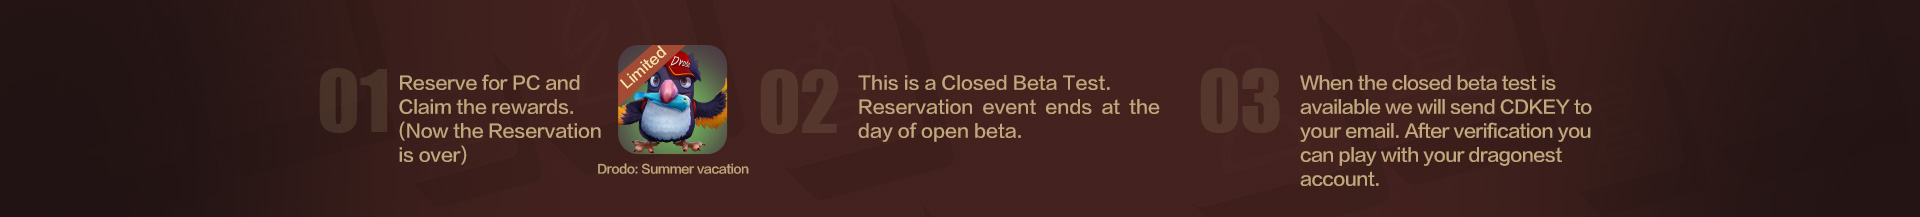 auto chess reservation